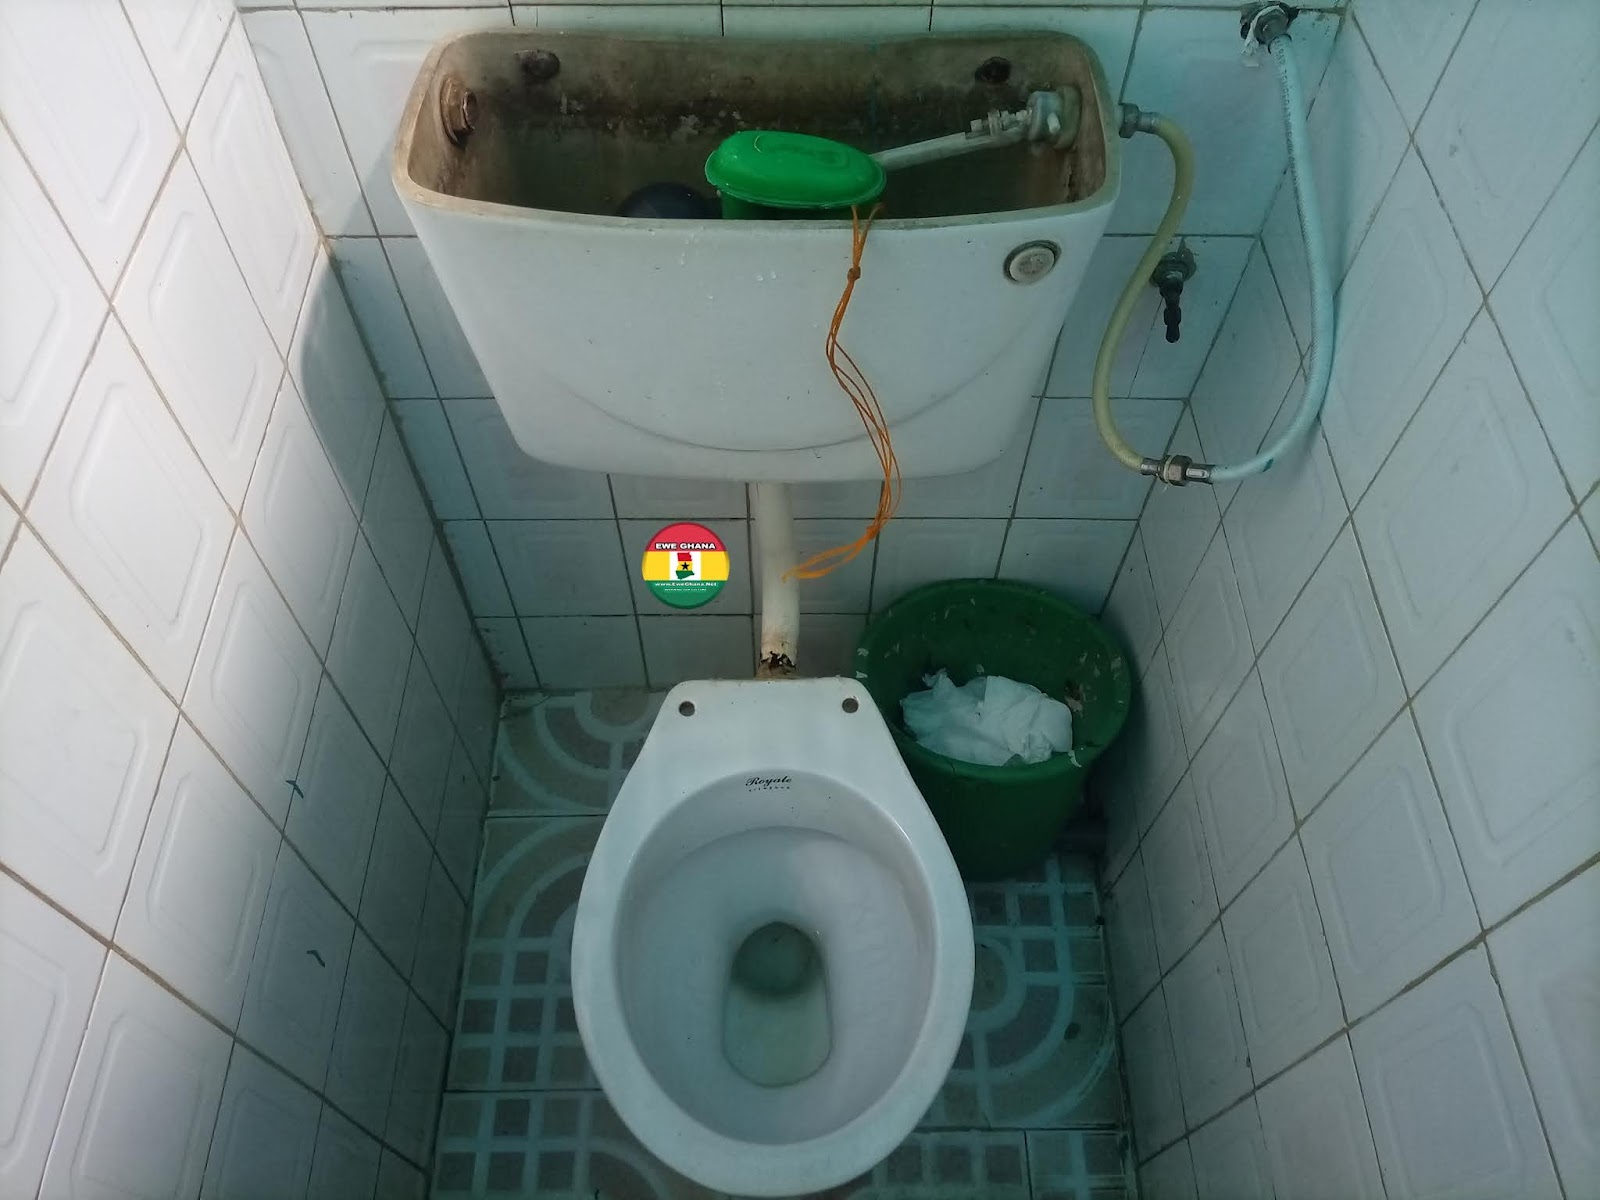 If you use your toilet, stop doing these things; Your life may be in danger ”- warns the doctor